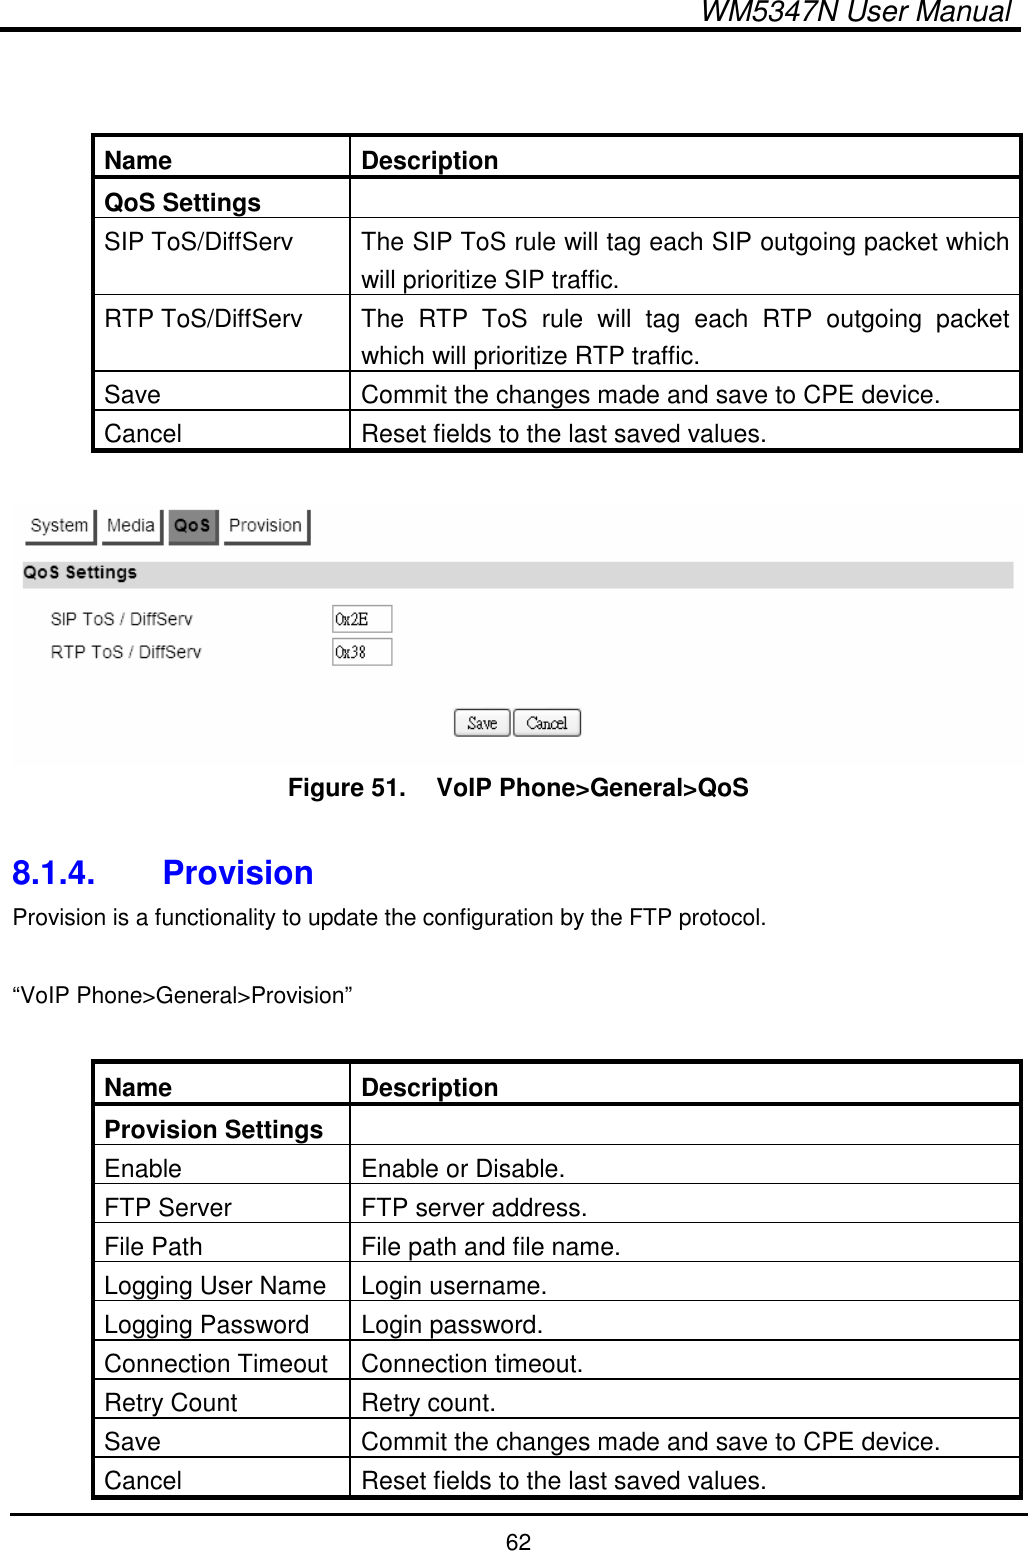  WM5347N User Manual  62   Name  Description QoS Settings   SIP ToS/DiffServ  The SIP ToS rule will tag each SIP outgoing packet which will prioritize SIP traffic. RTP ToS/DiffServ  The  RTP  ToS  rule  will  tag  each  RTP  outgoing  packet which will prioritize RTP traffic. Save  Commit the changes made and save to CPE device. Cancel  Reset fields to the last saved values.   Figure 51.   VoIP Phone&gt;General&gt;QoS  8.1.4.  Provision Provision is a functionality to update the configuration by the FTP protocol.  “VoIP Phone&gt;General&gt;Provision”  Name  Description Provision Settings   Enable  Enable or Disable. FTP Server  FTP server address. File Path  File path and file name. Logging User Name  Login username. Logging Password  Login password. Connection Timeout  Connection timeout. Retry Count  Retry count. Save  Commit the changes made and save to CPE device. Cancel  Reset fields to the last saved values. 